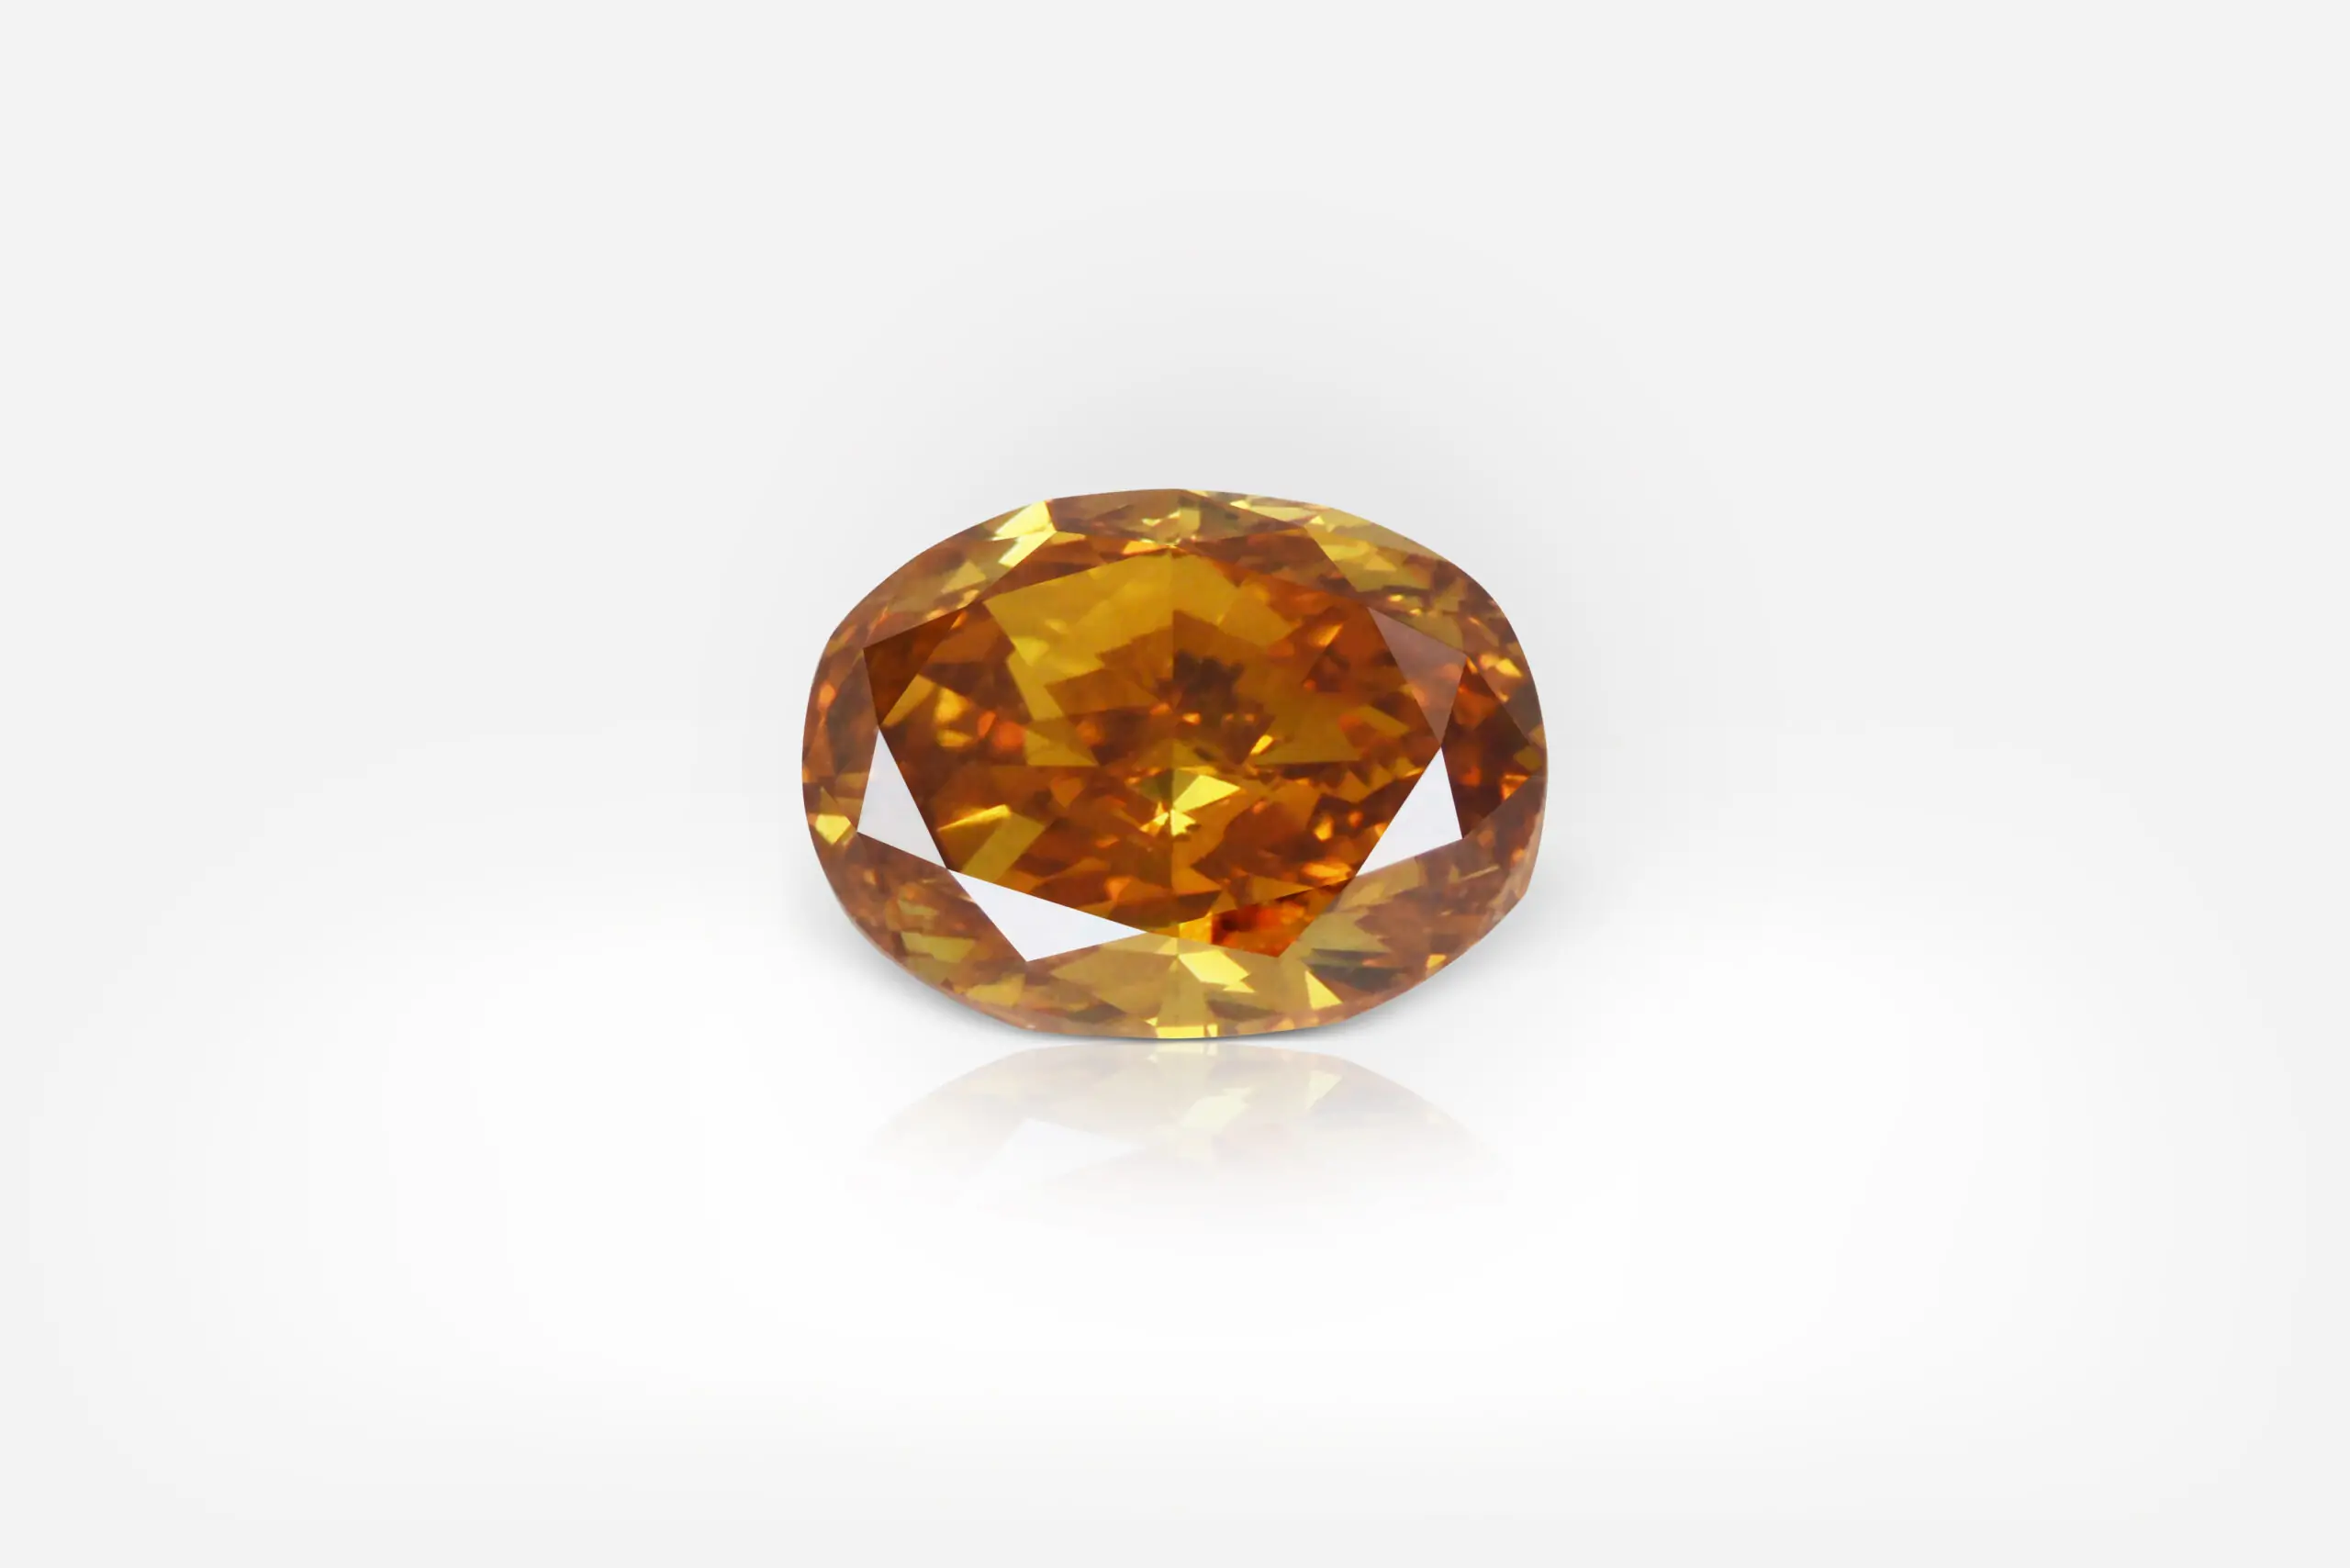 0.55 Carat Fancy Deep Brownish Orangy Yellow SI2 Oval Shape Diamond GIA - picture 1